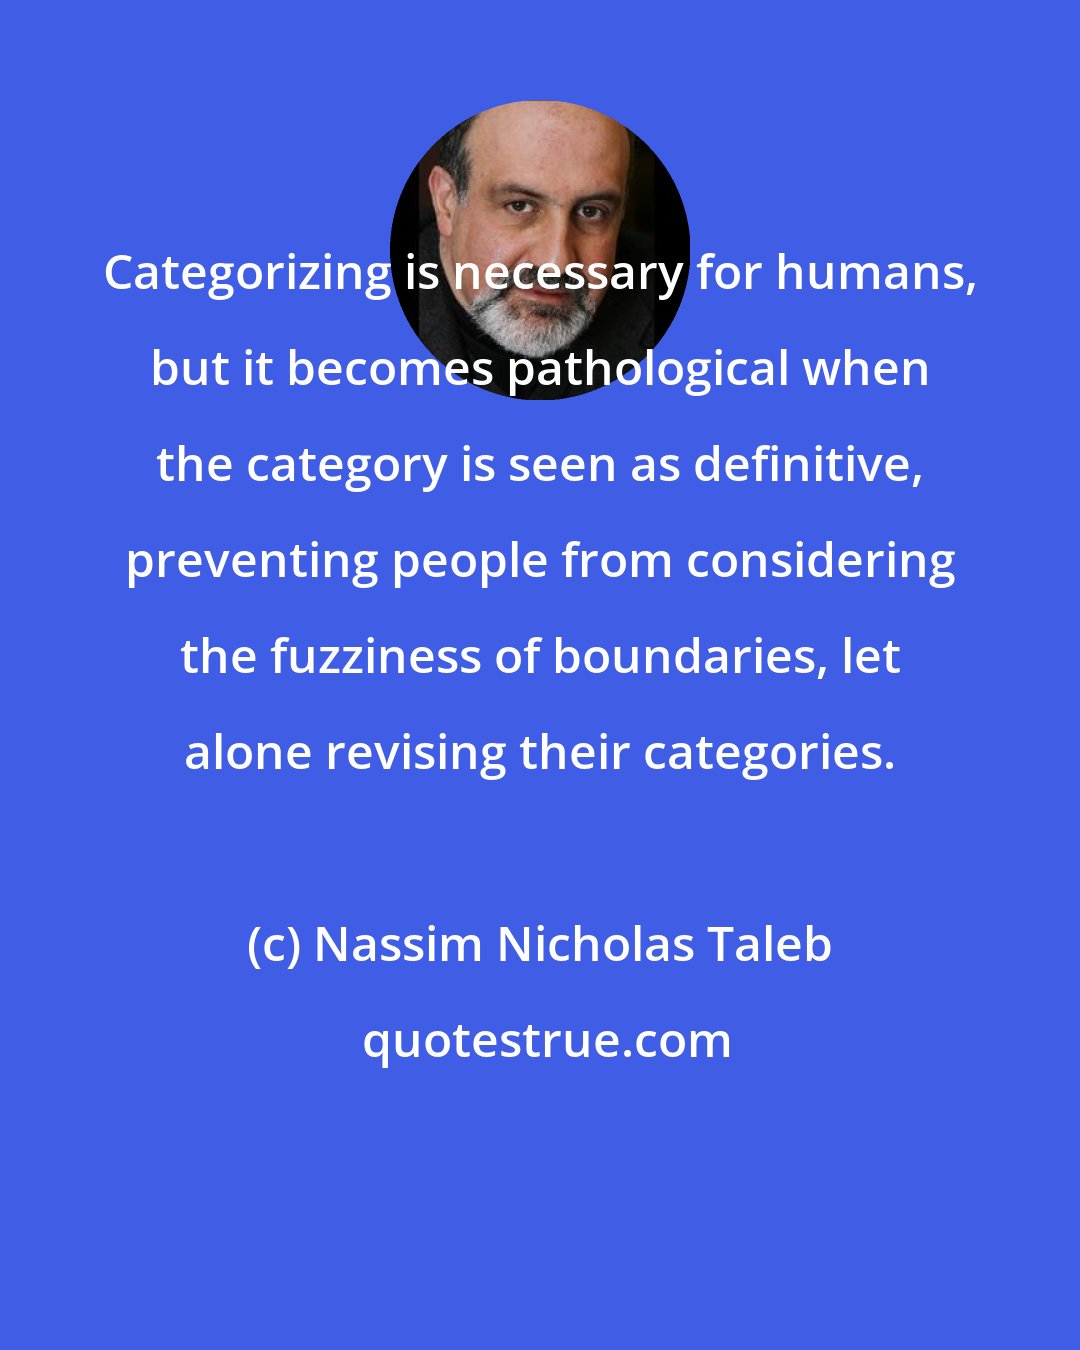 Nassim Nicholas Taleb: Categorizing is necessary for humans, but it becomes pathological when the category is seen as definitive, preventing people from considering the fuzziness of boundaries, let alone revising their categories.